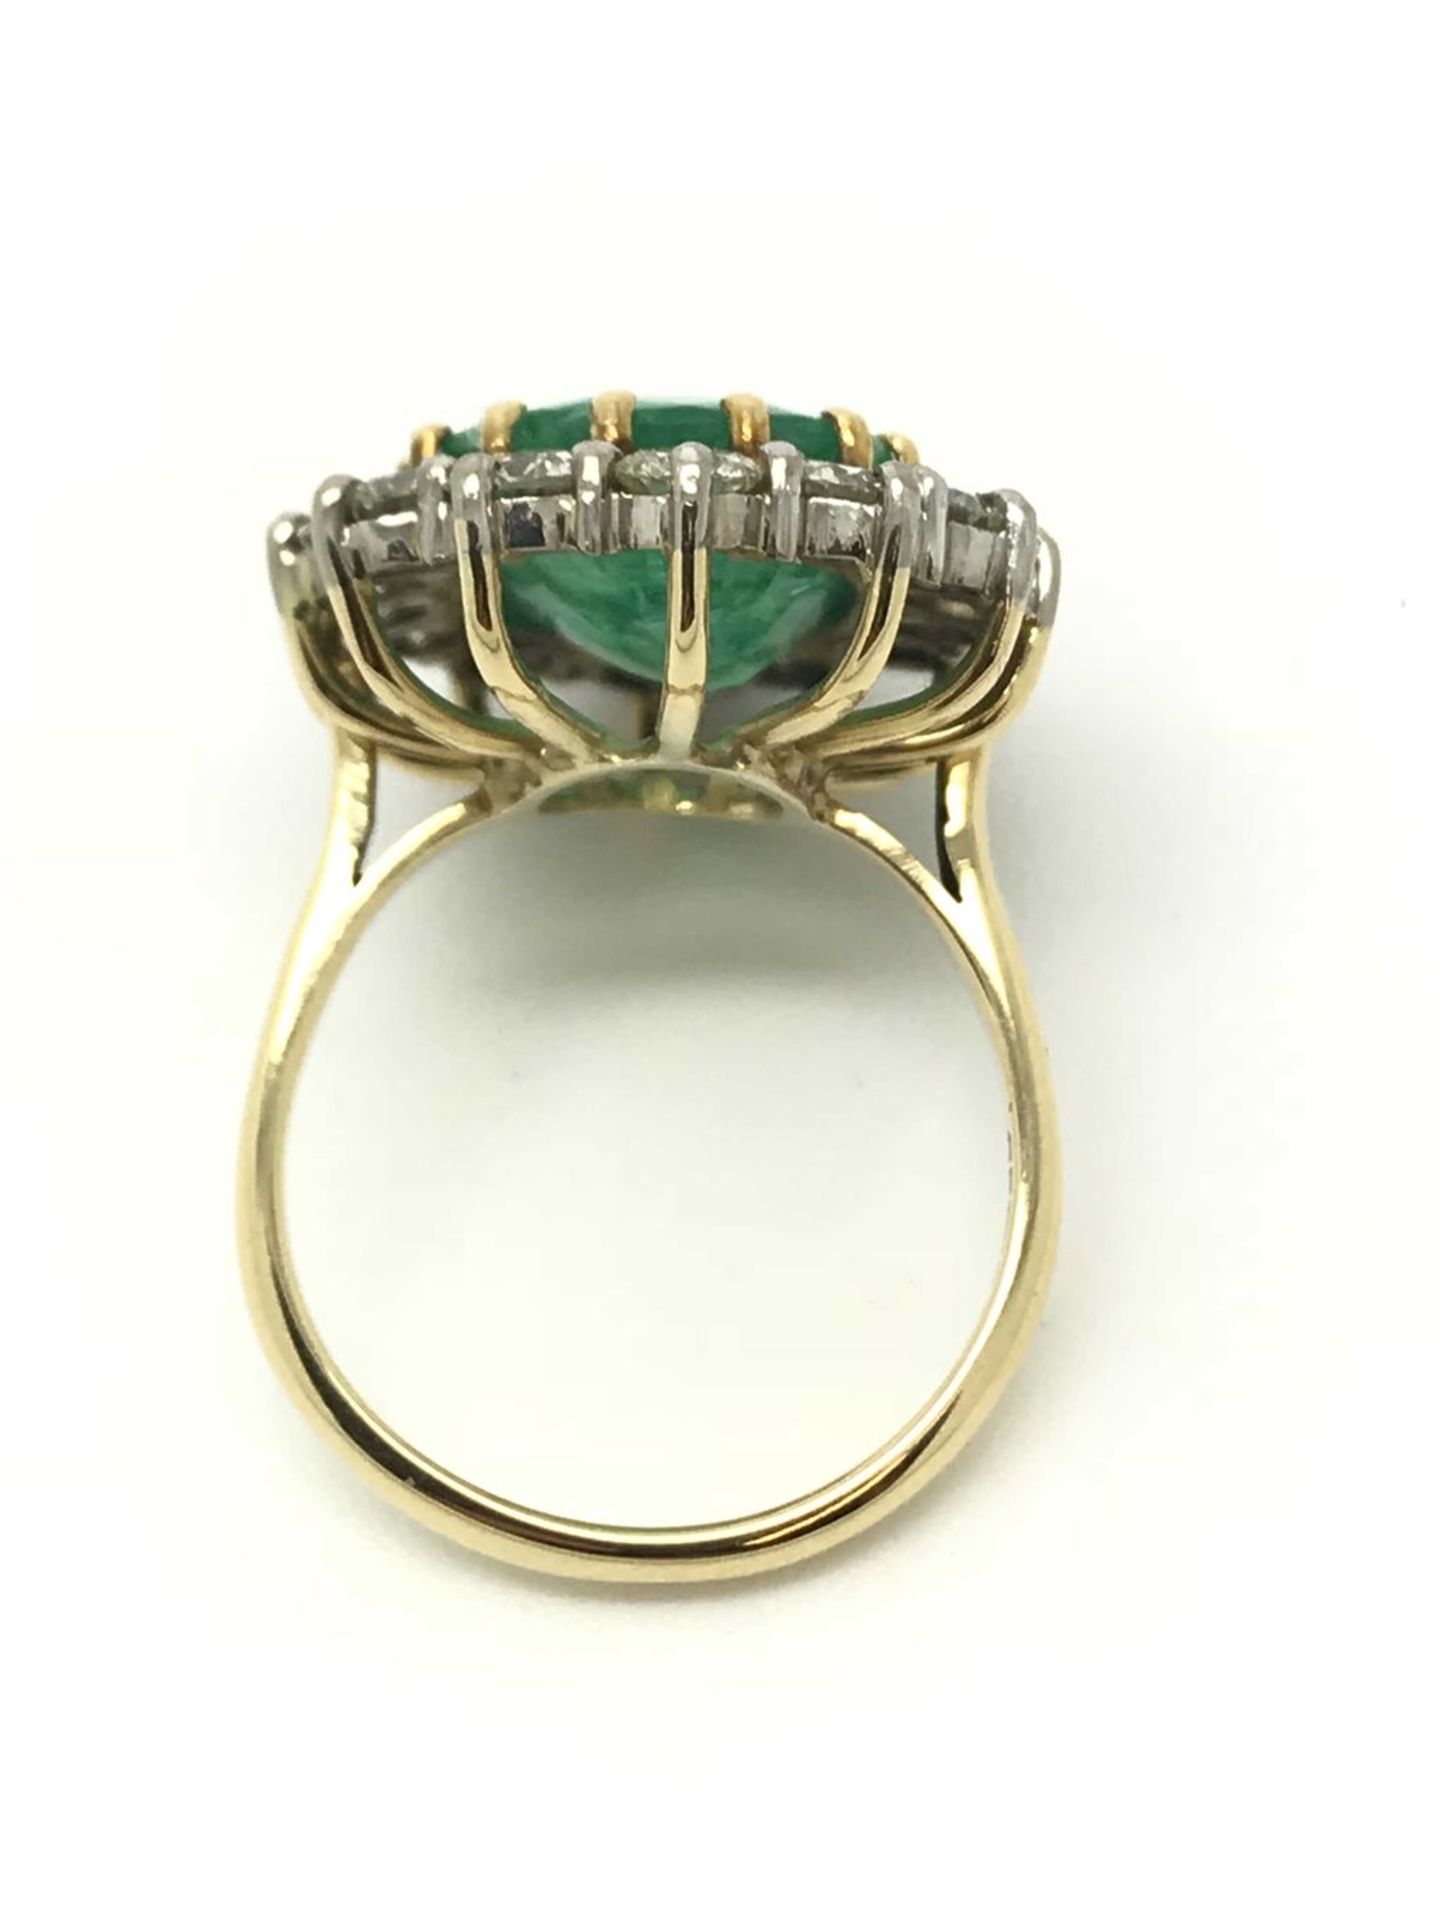 Emerald (6.93ct) & Diamond (2.10ct) Large Cluster Ring - 18ct Gold - Image 4 of 5